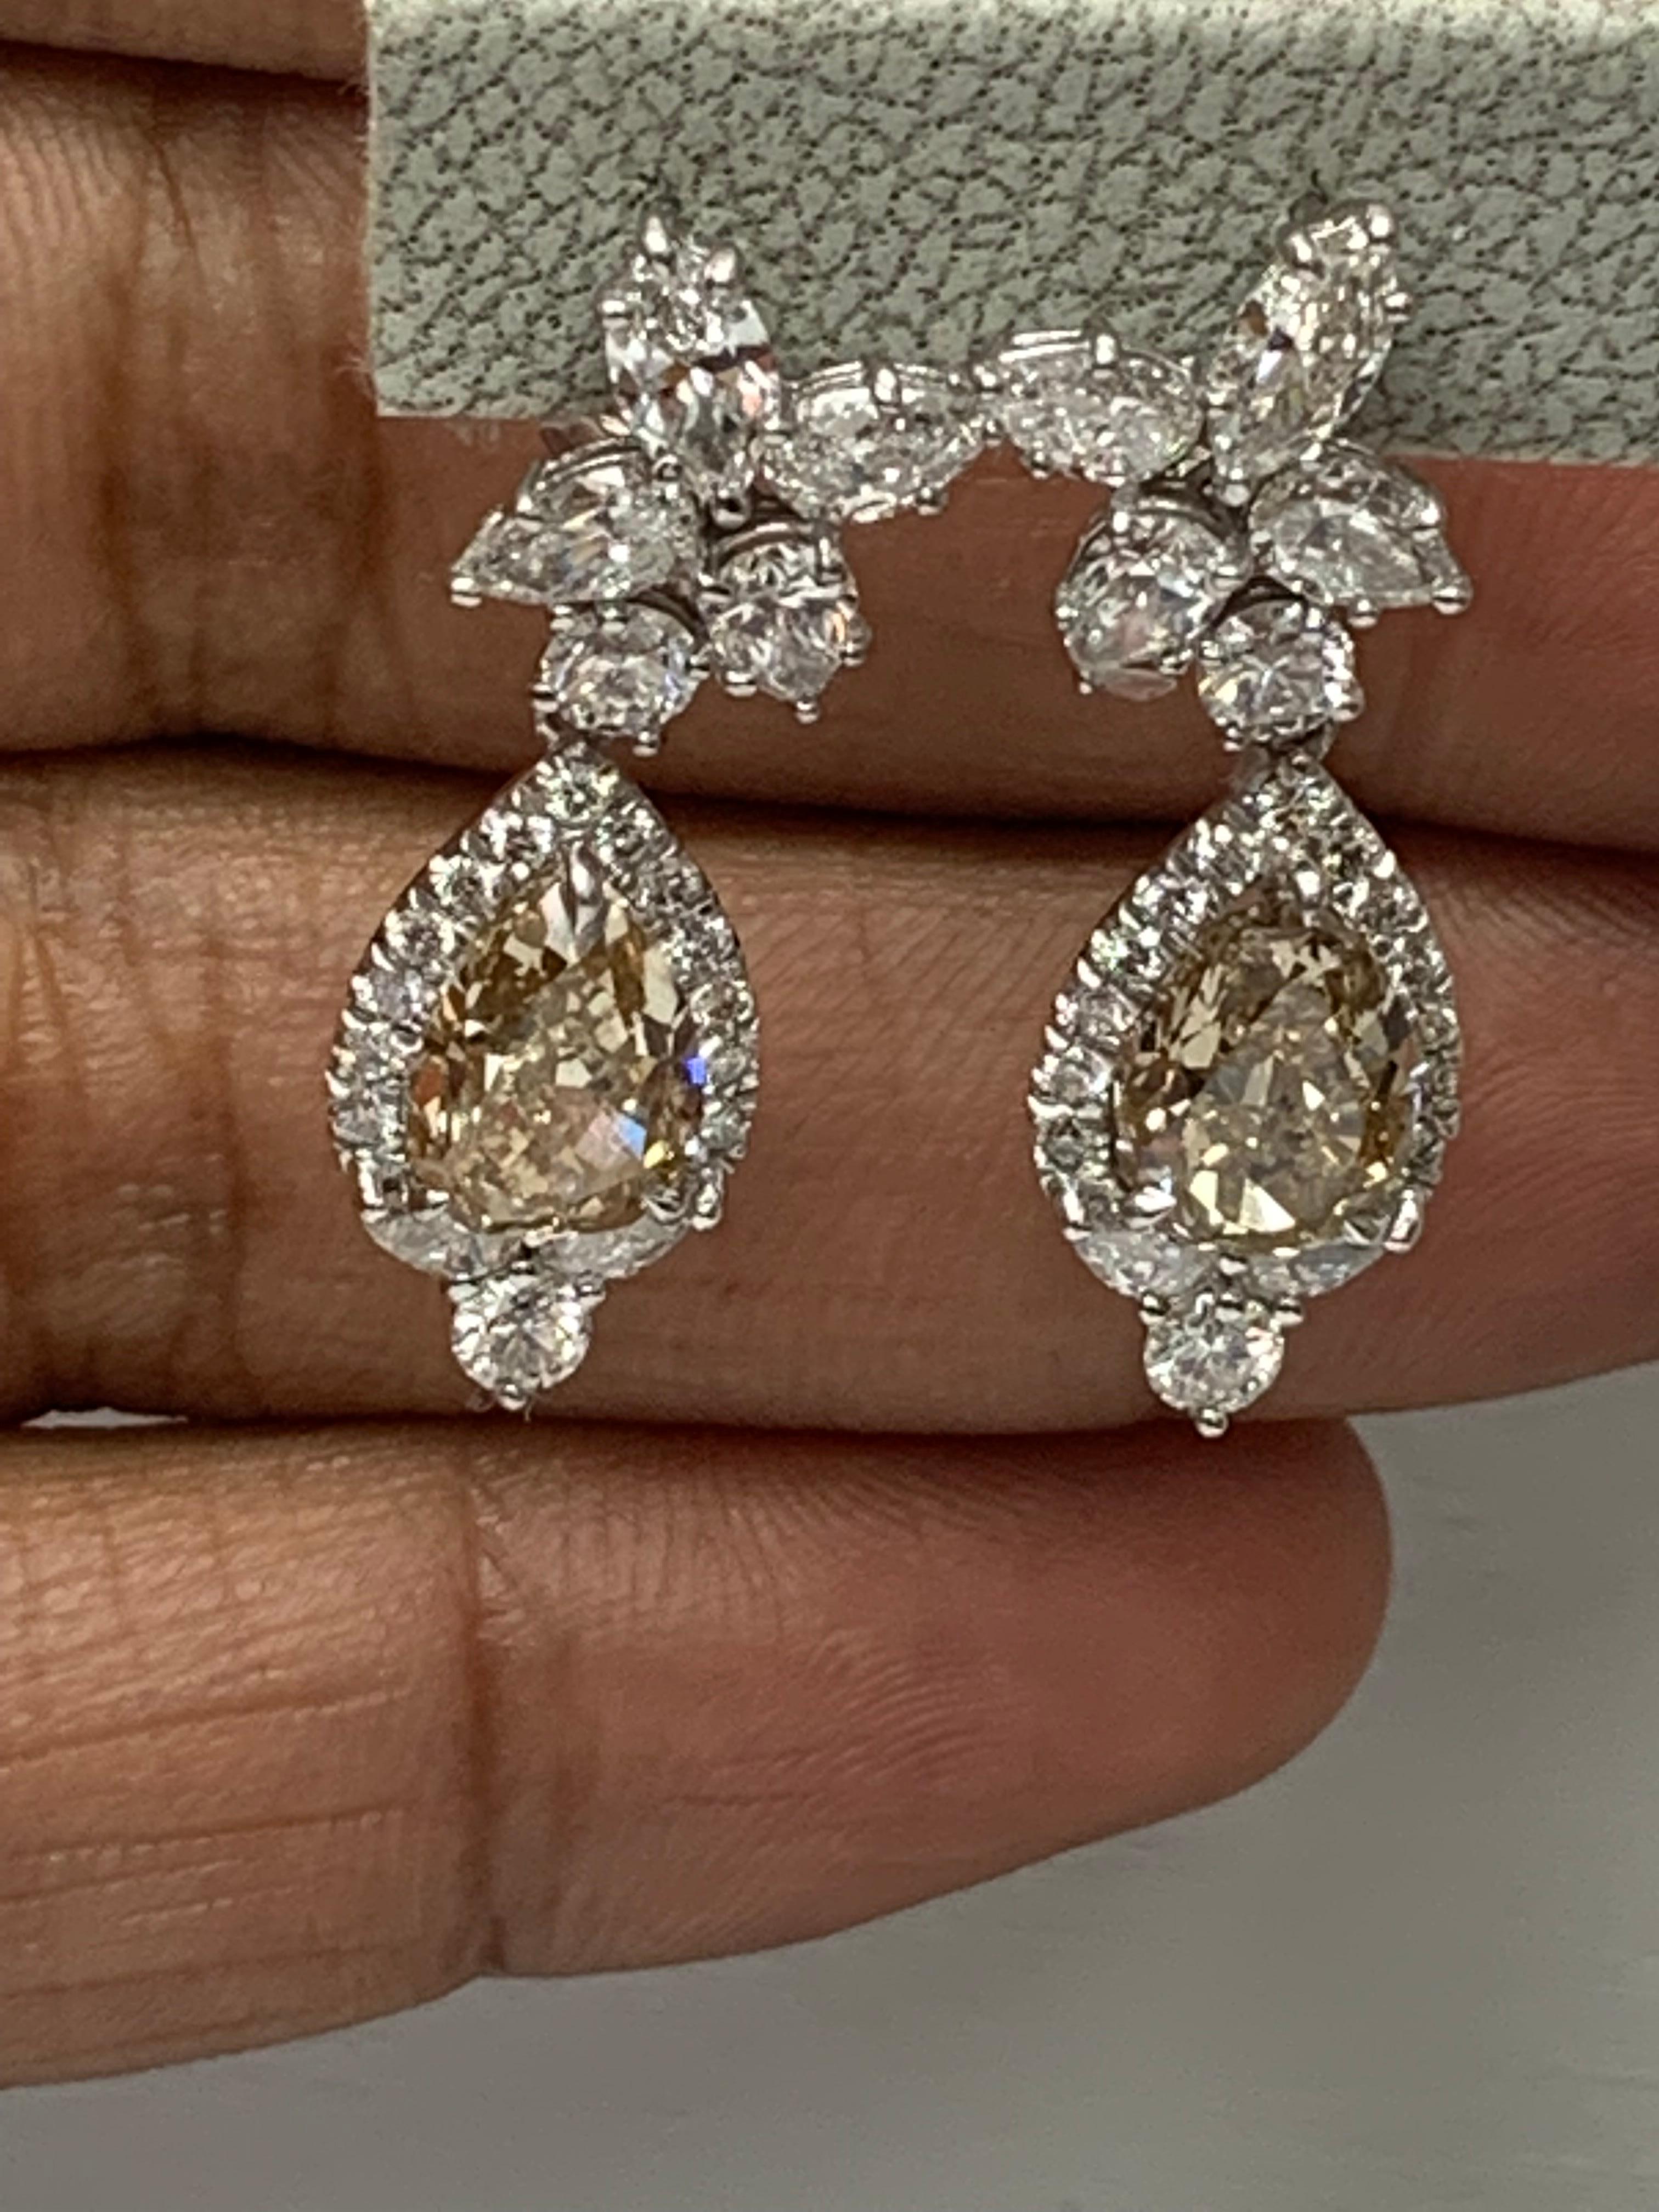 A beautiful and chic pair of drop earrings showcasing a cluster of brilliant mixed-cut diamonds, and pear-shaped brilliant brown diamonds set in an intricate and stylish design.  10 Mixed cut Diamonds weigh 1.91 carats in total. 2 Brown diamonds